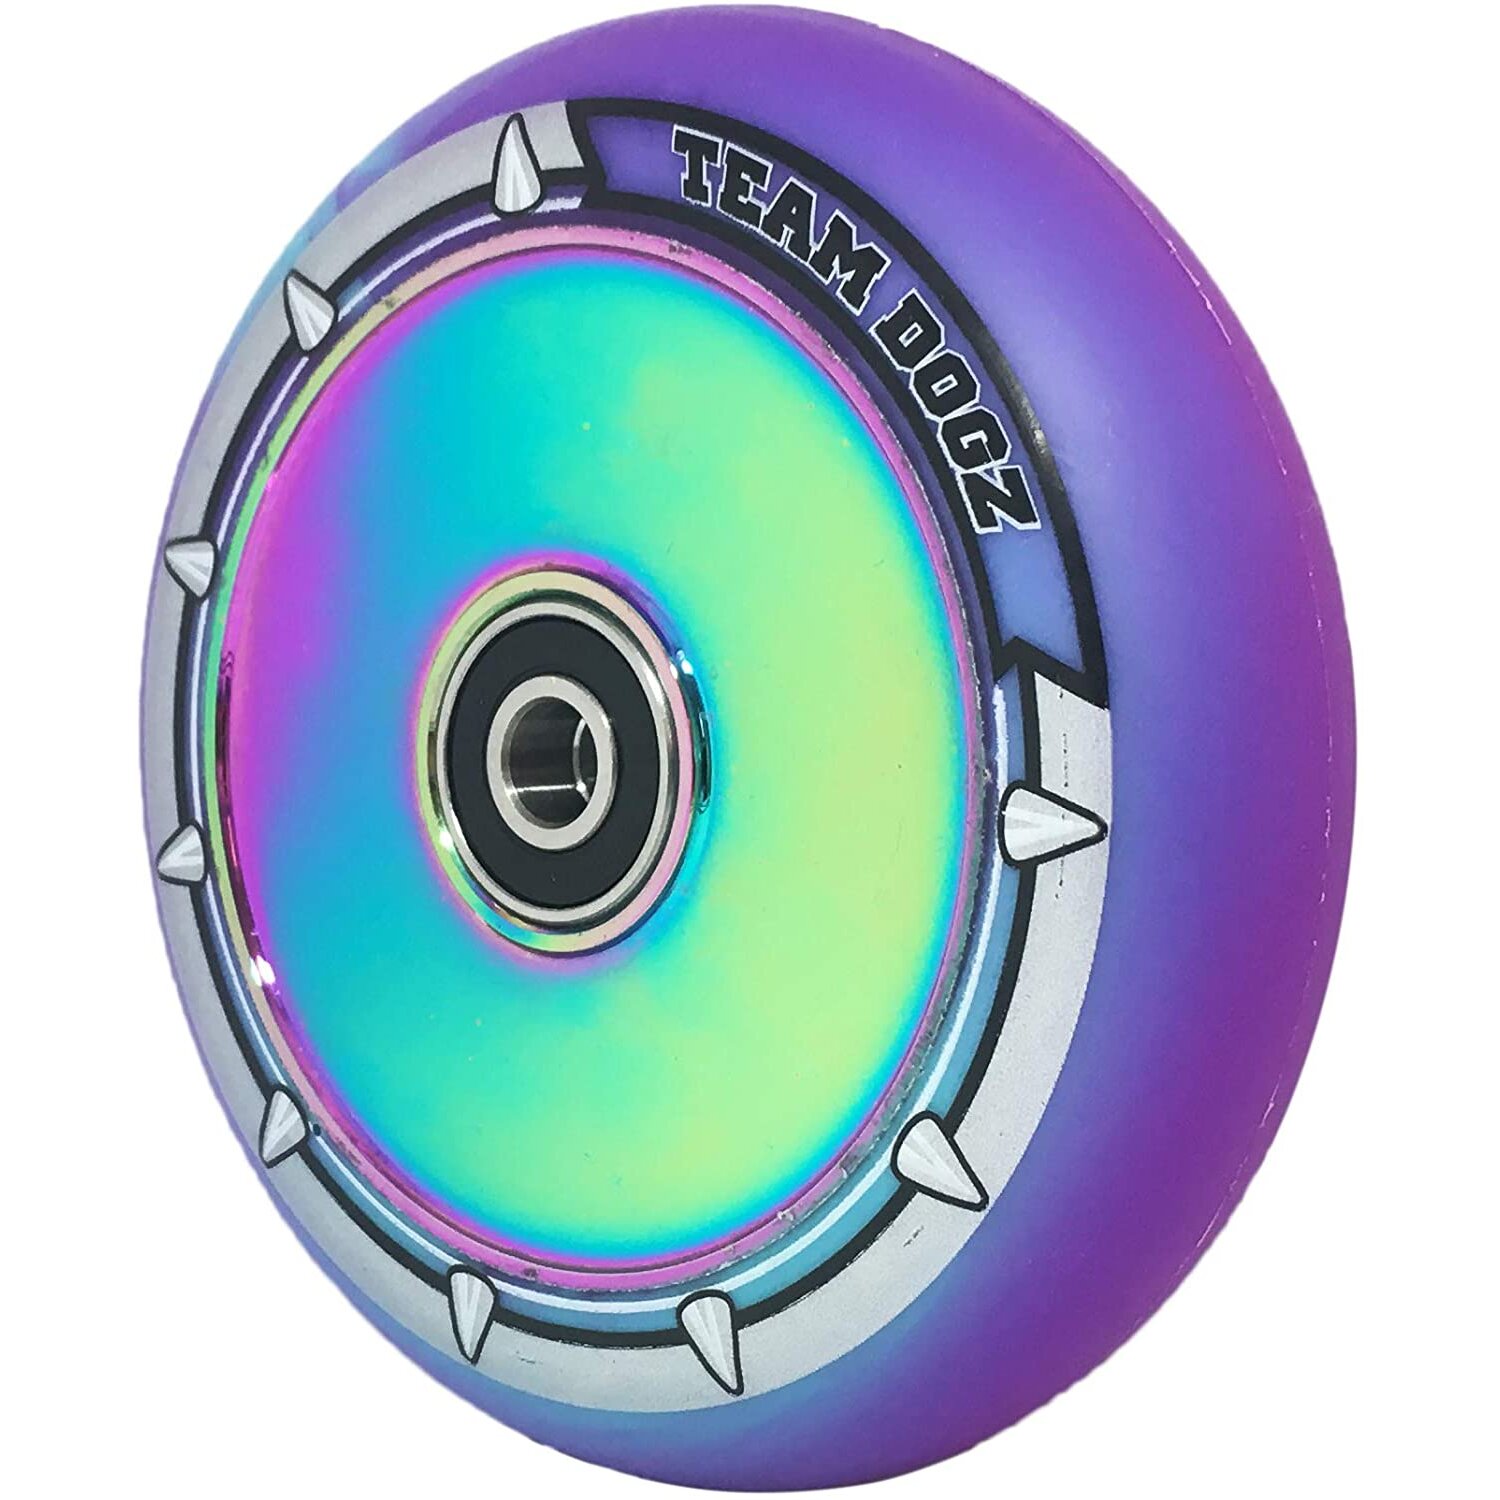 Team Dogz Alloy Hollow Core wheels 100mm Diameter, replacement Scooter Wheels - Rainbow core with Green & Purple mixed pu